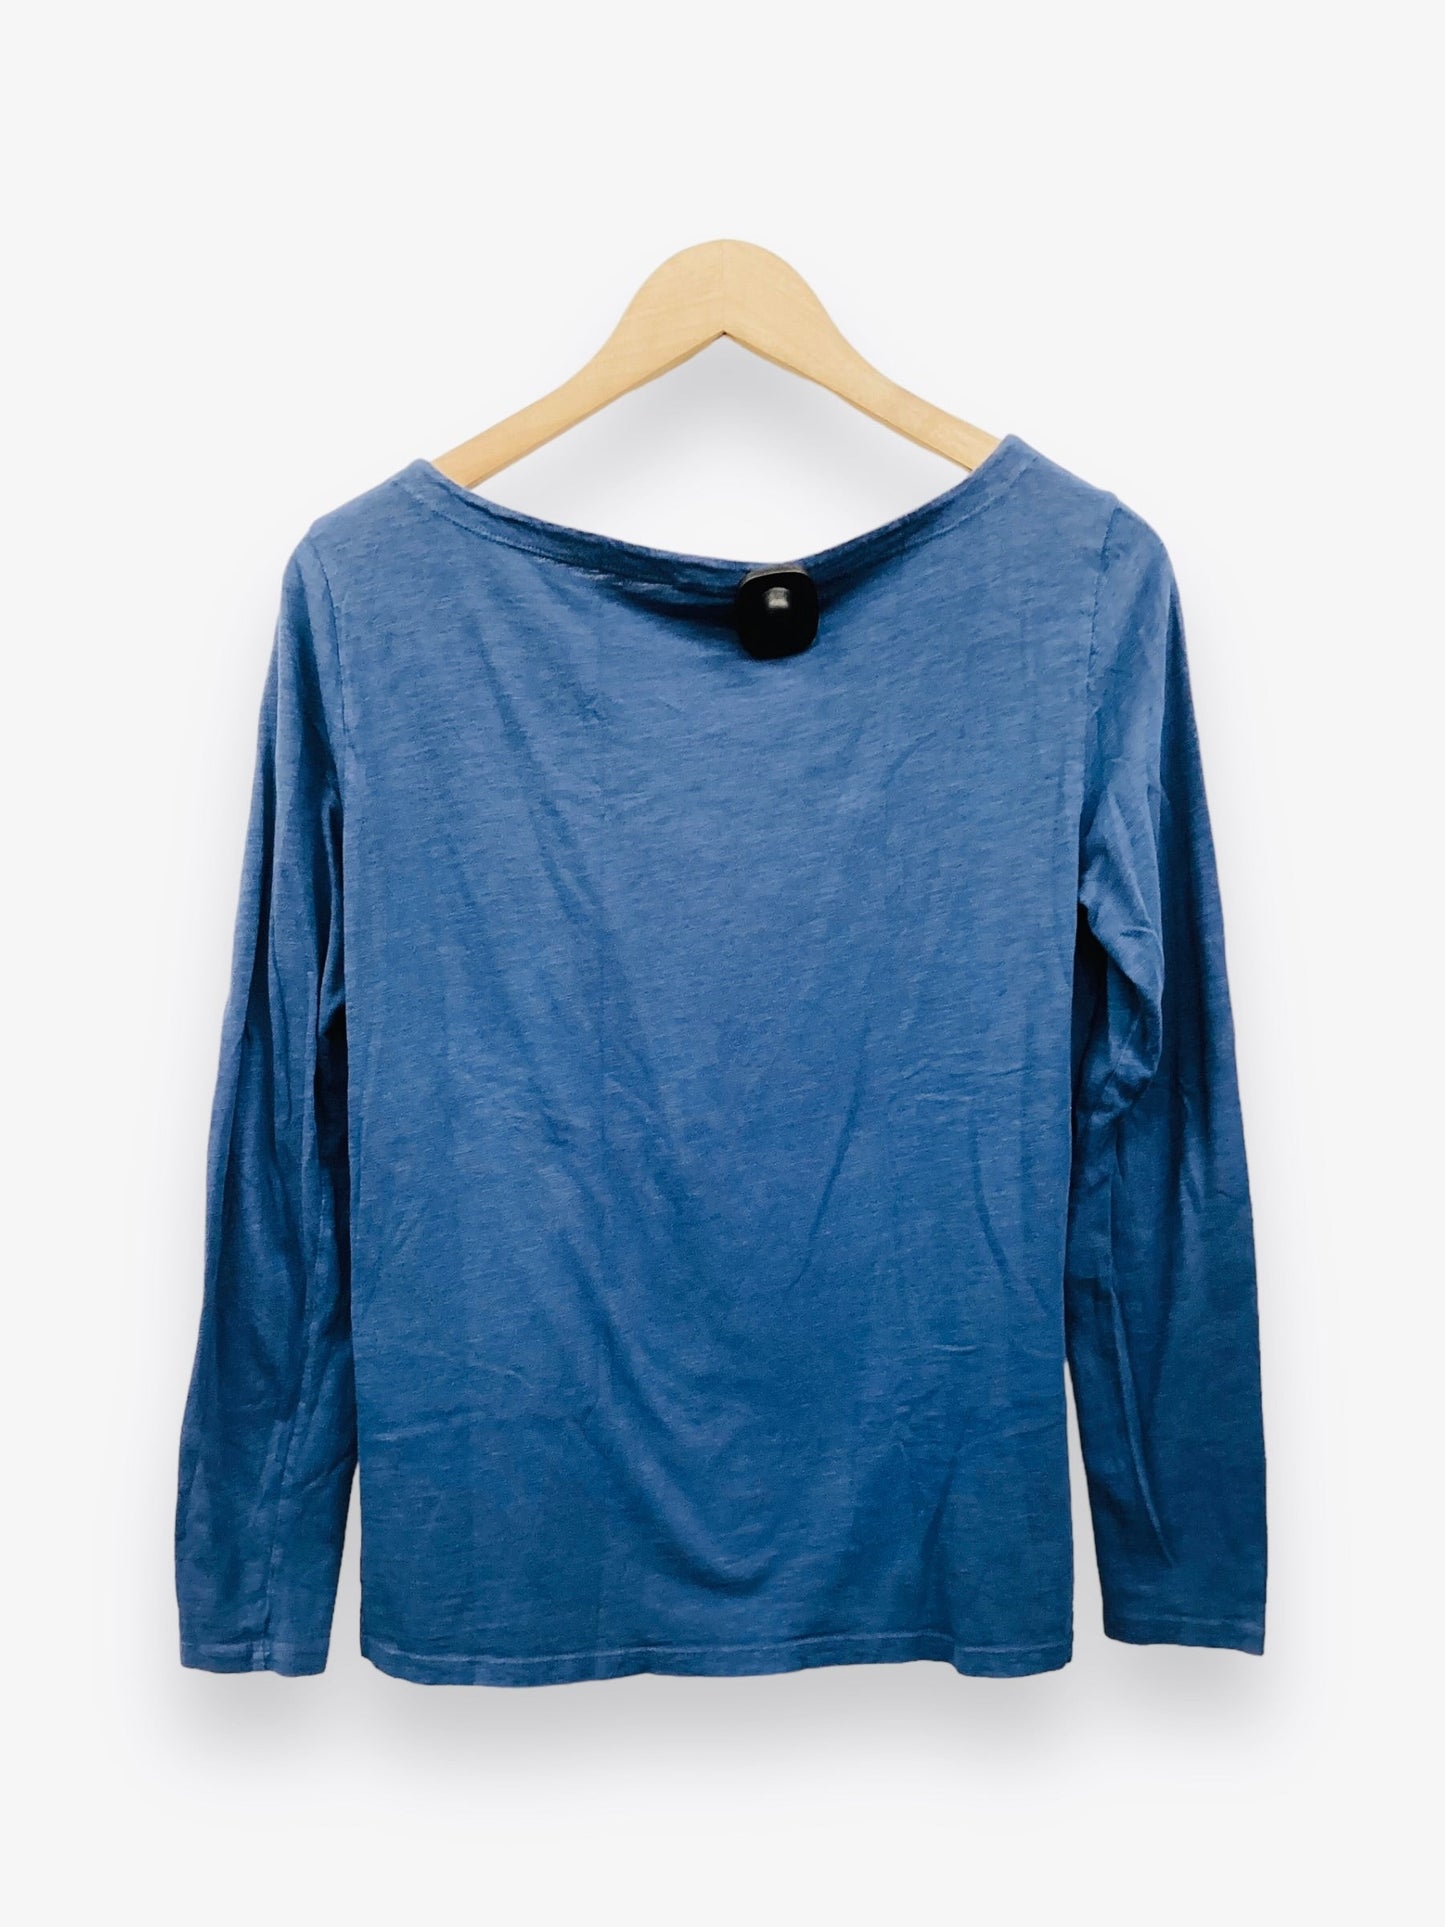 Blue Top Long Sleeve Eileen Fisher, Size S